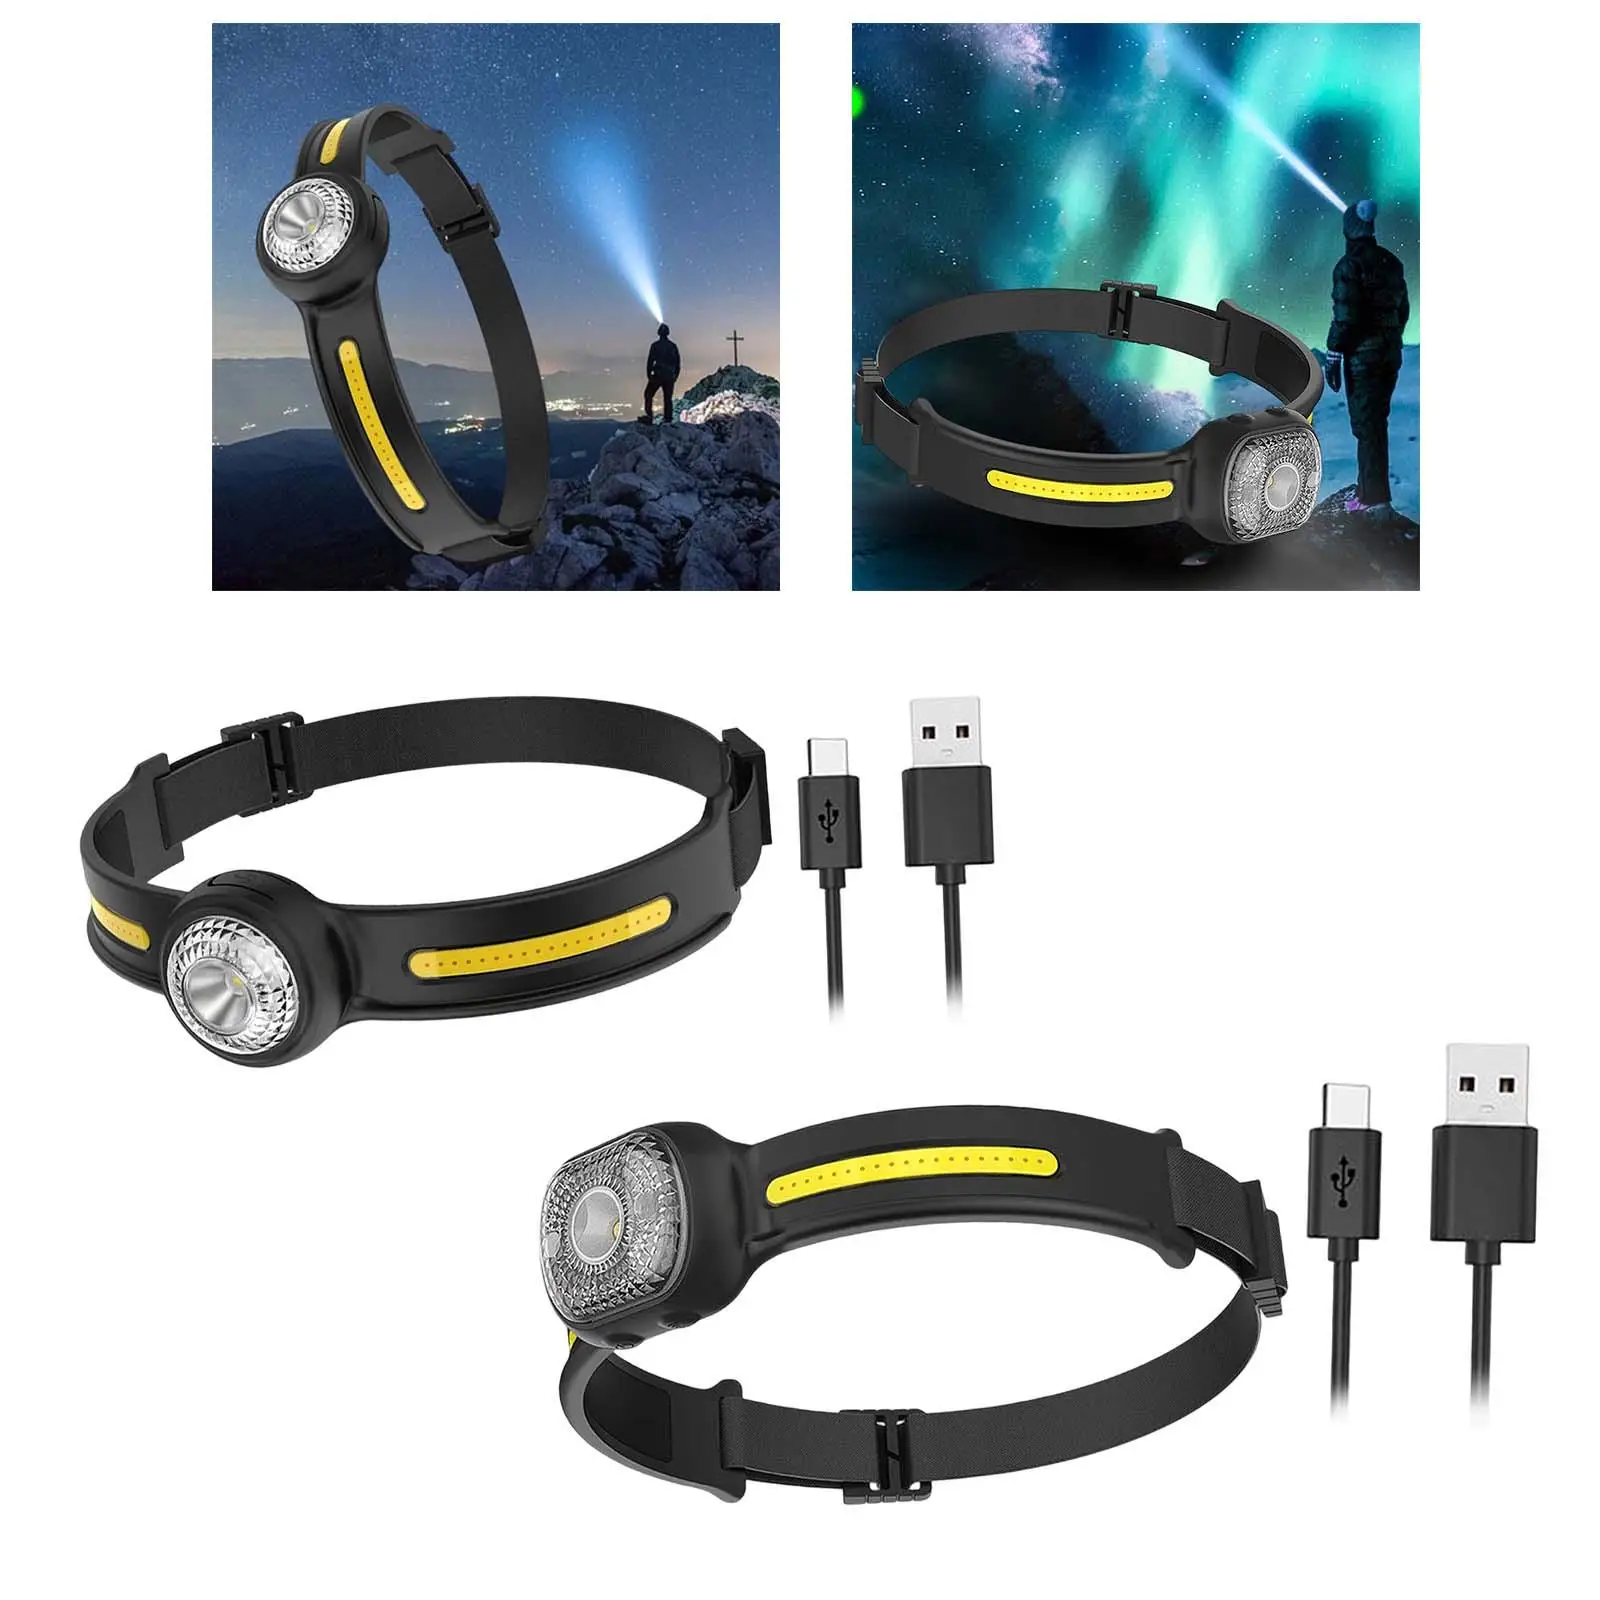 Rechargeable Mini headlamps Lightweight Flashlight Folding 270 Degree Waterproof LED Head lamp for Running Cycling Hiking